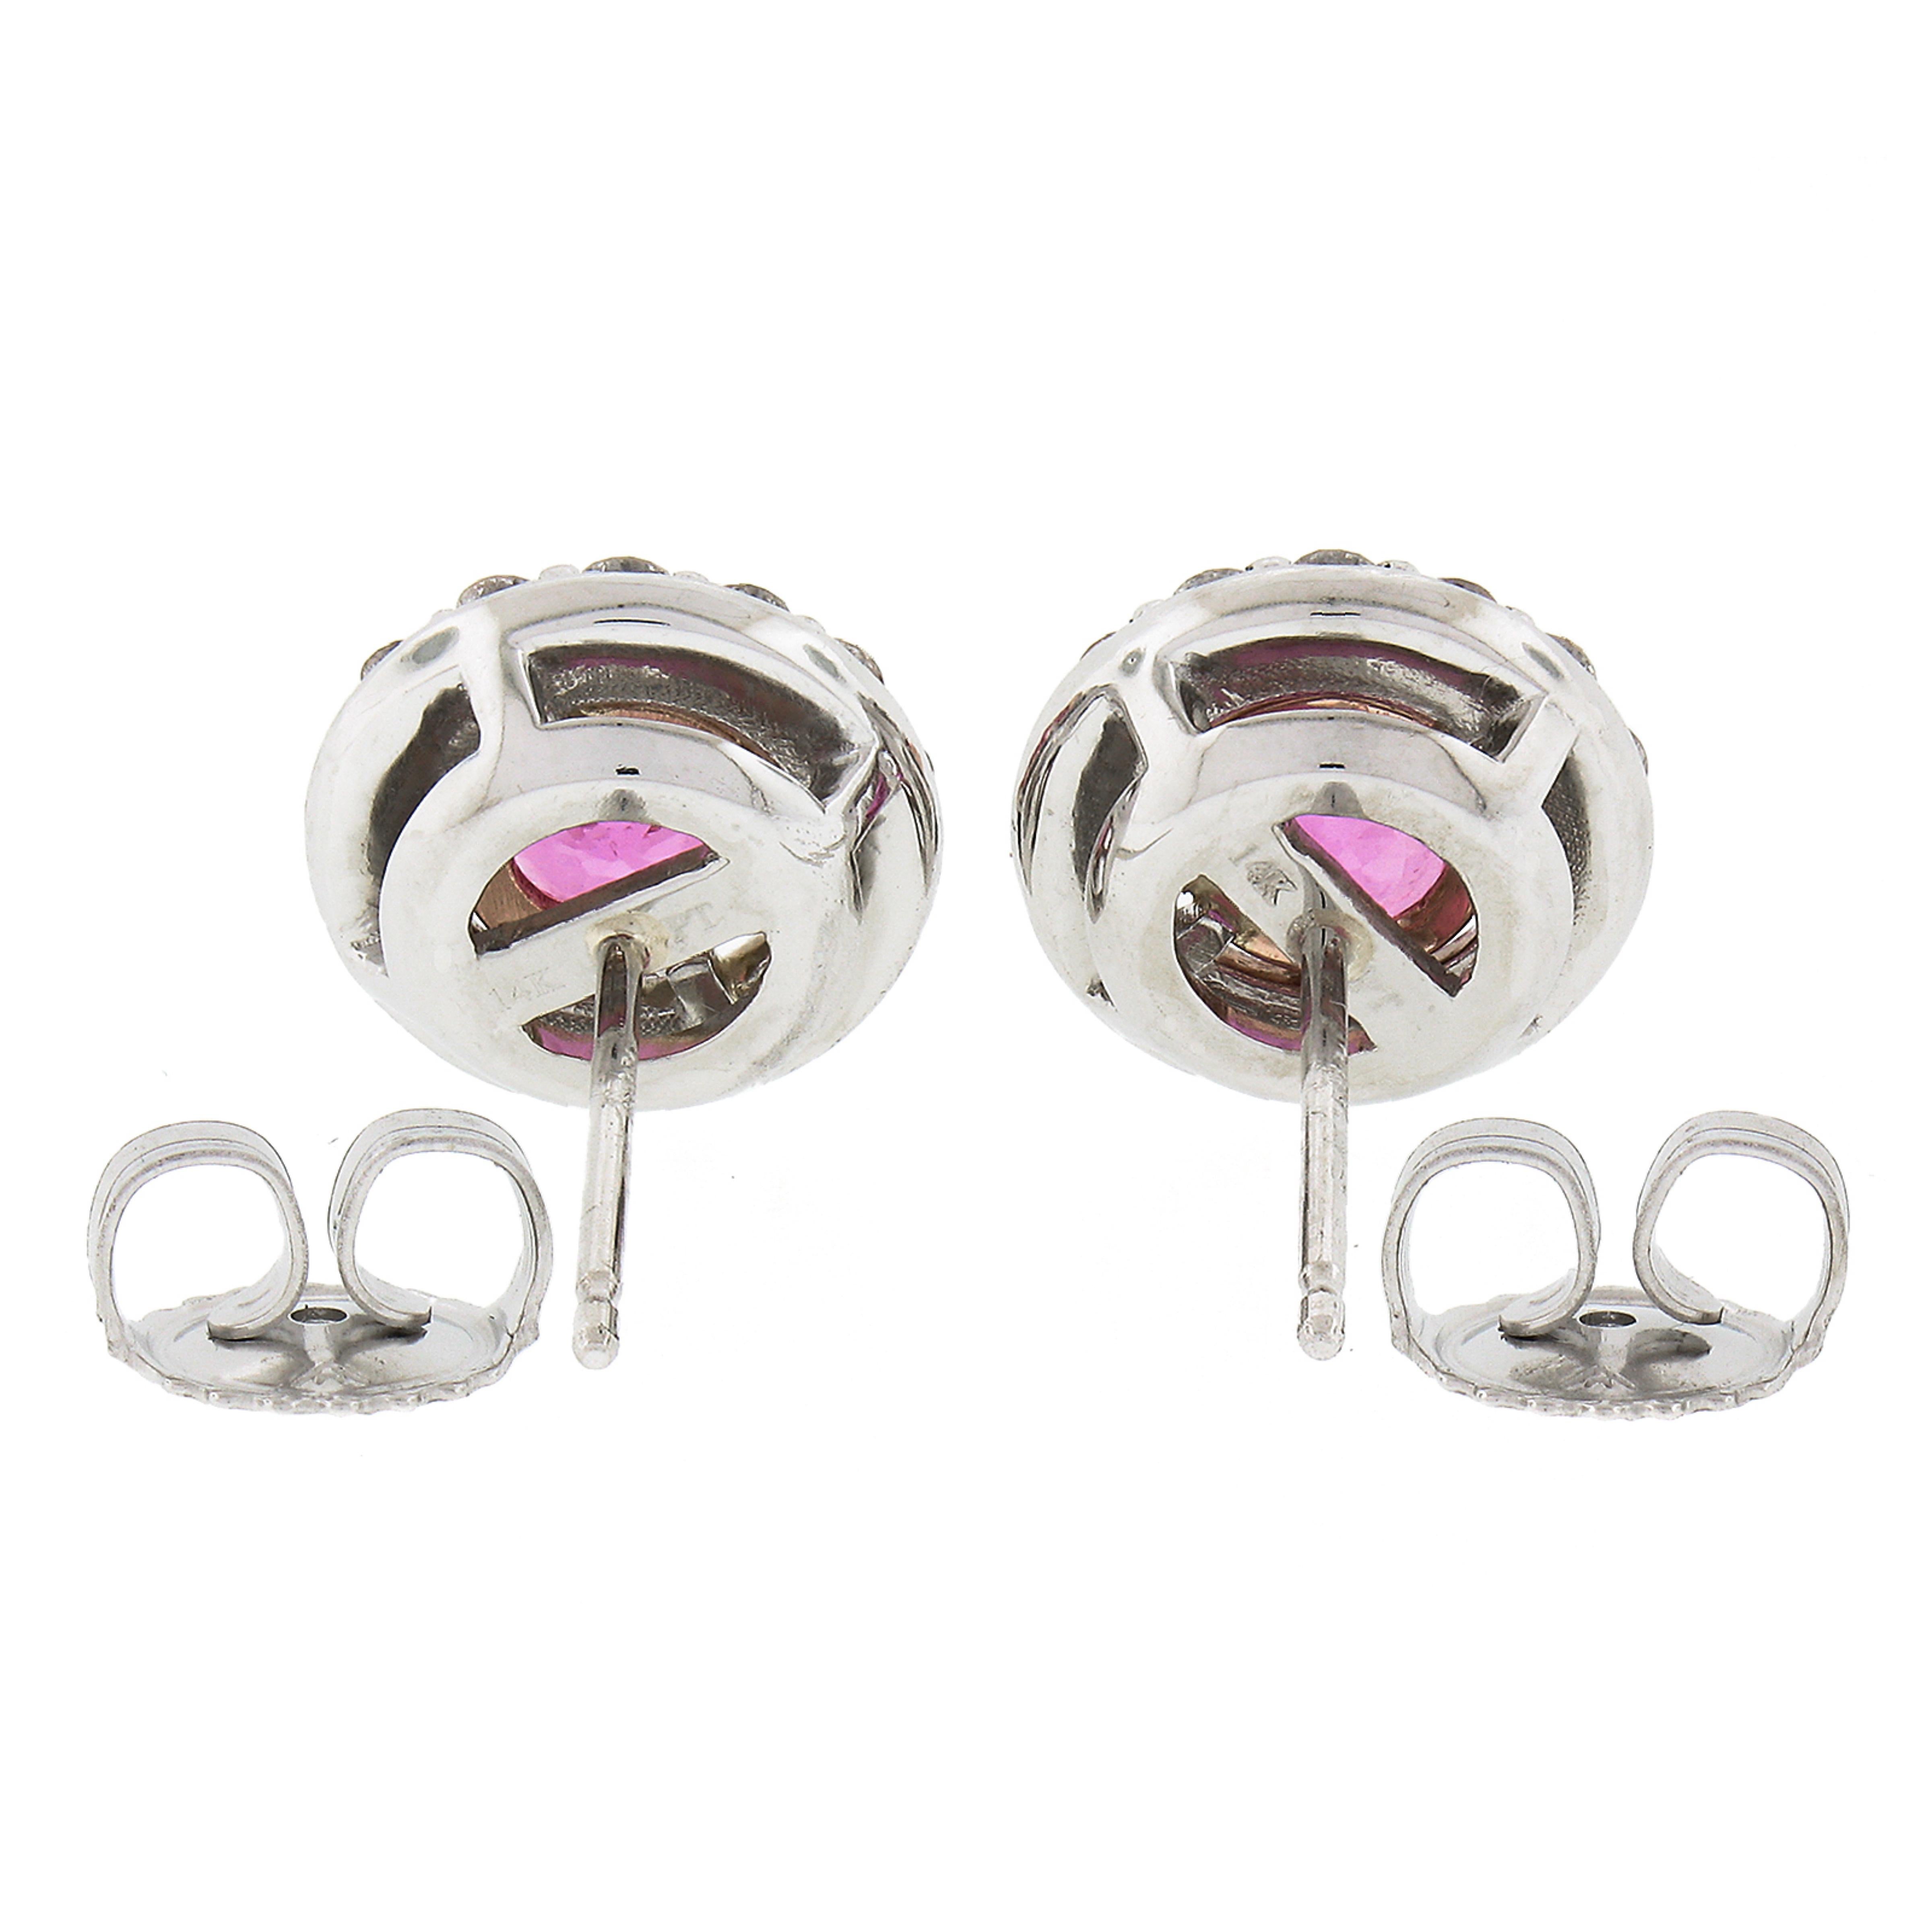 This is an absolutely gorgeous pair of sapphire and diamond cluster stud earrings, very well crafted in solid platinum & 14k rose gold. Each earring is prong set with a very fine quality, round brilliant cut pink sapphire at its center. The GIA